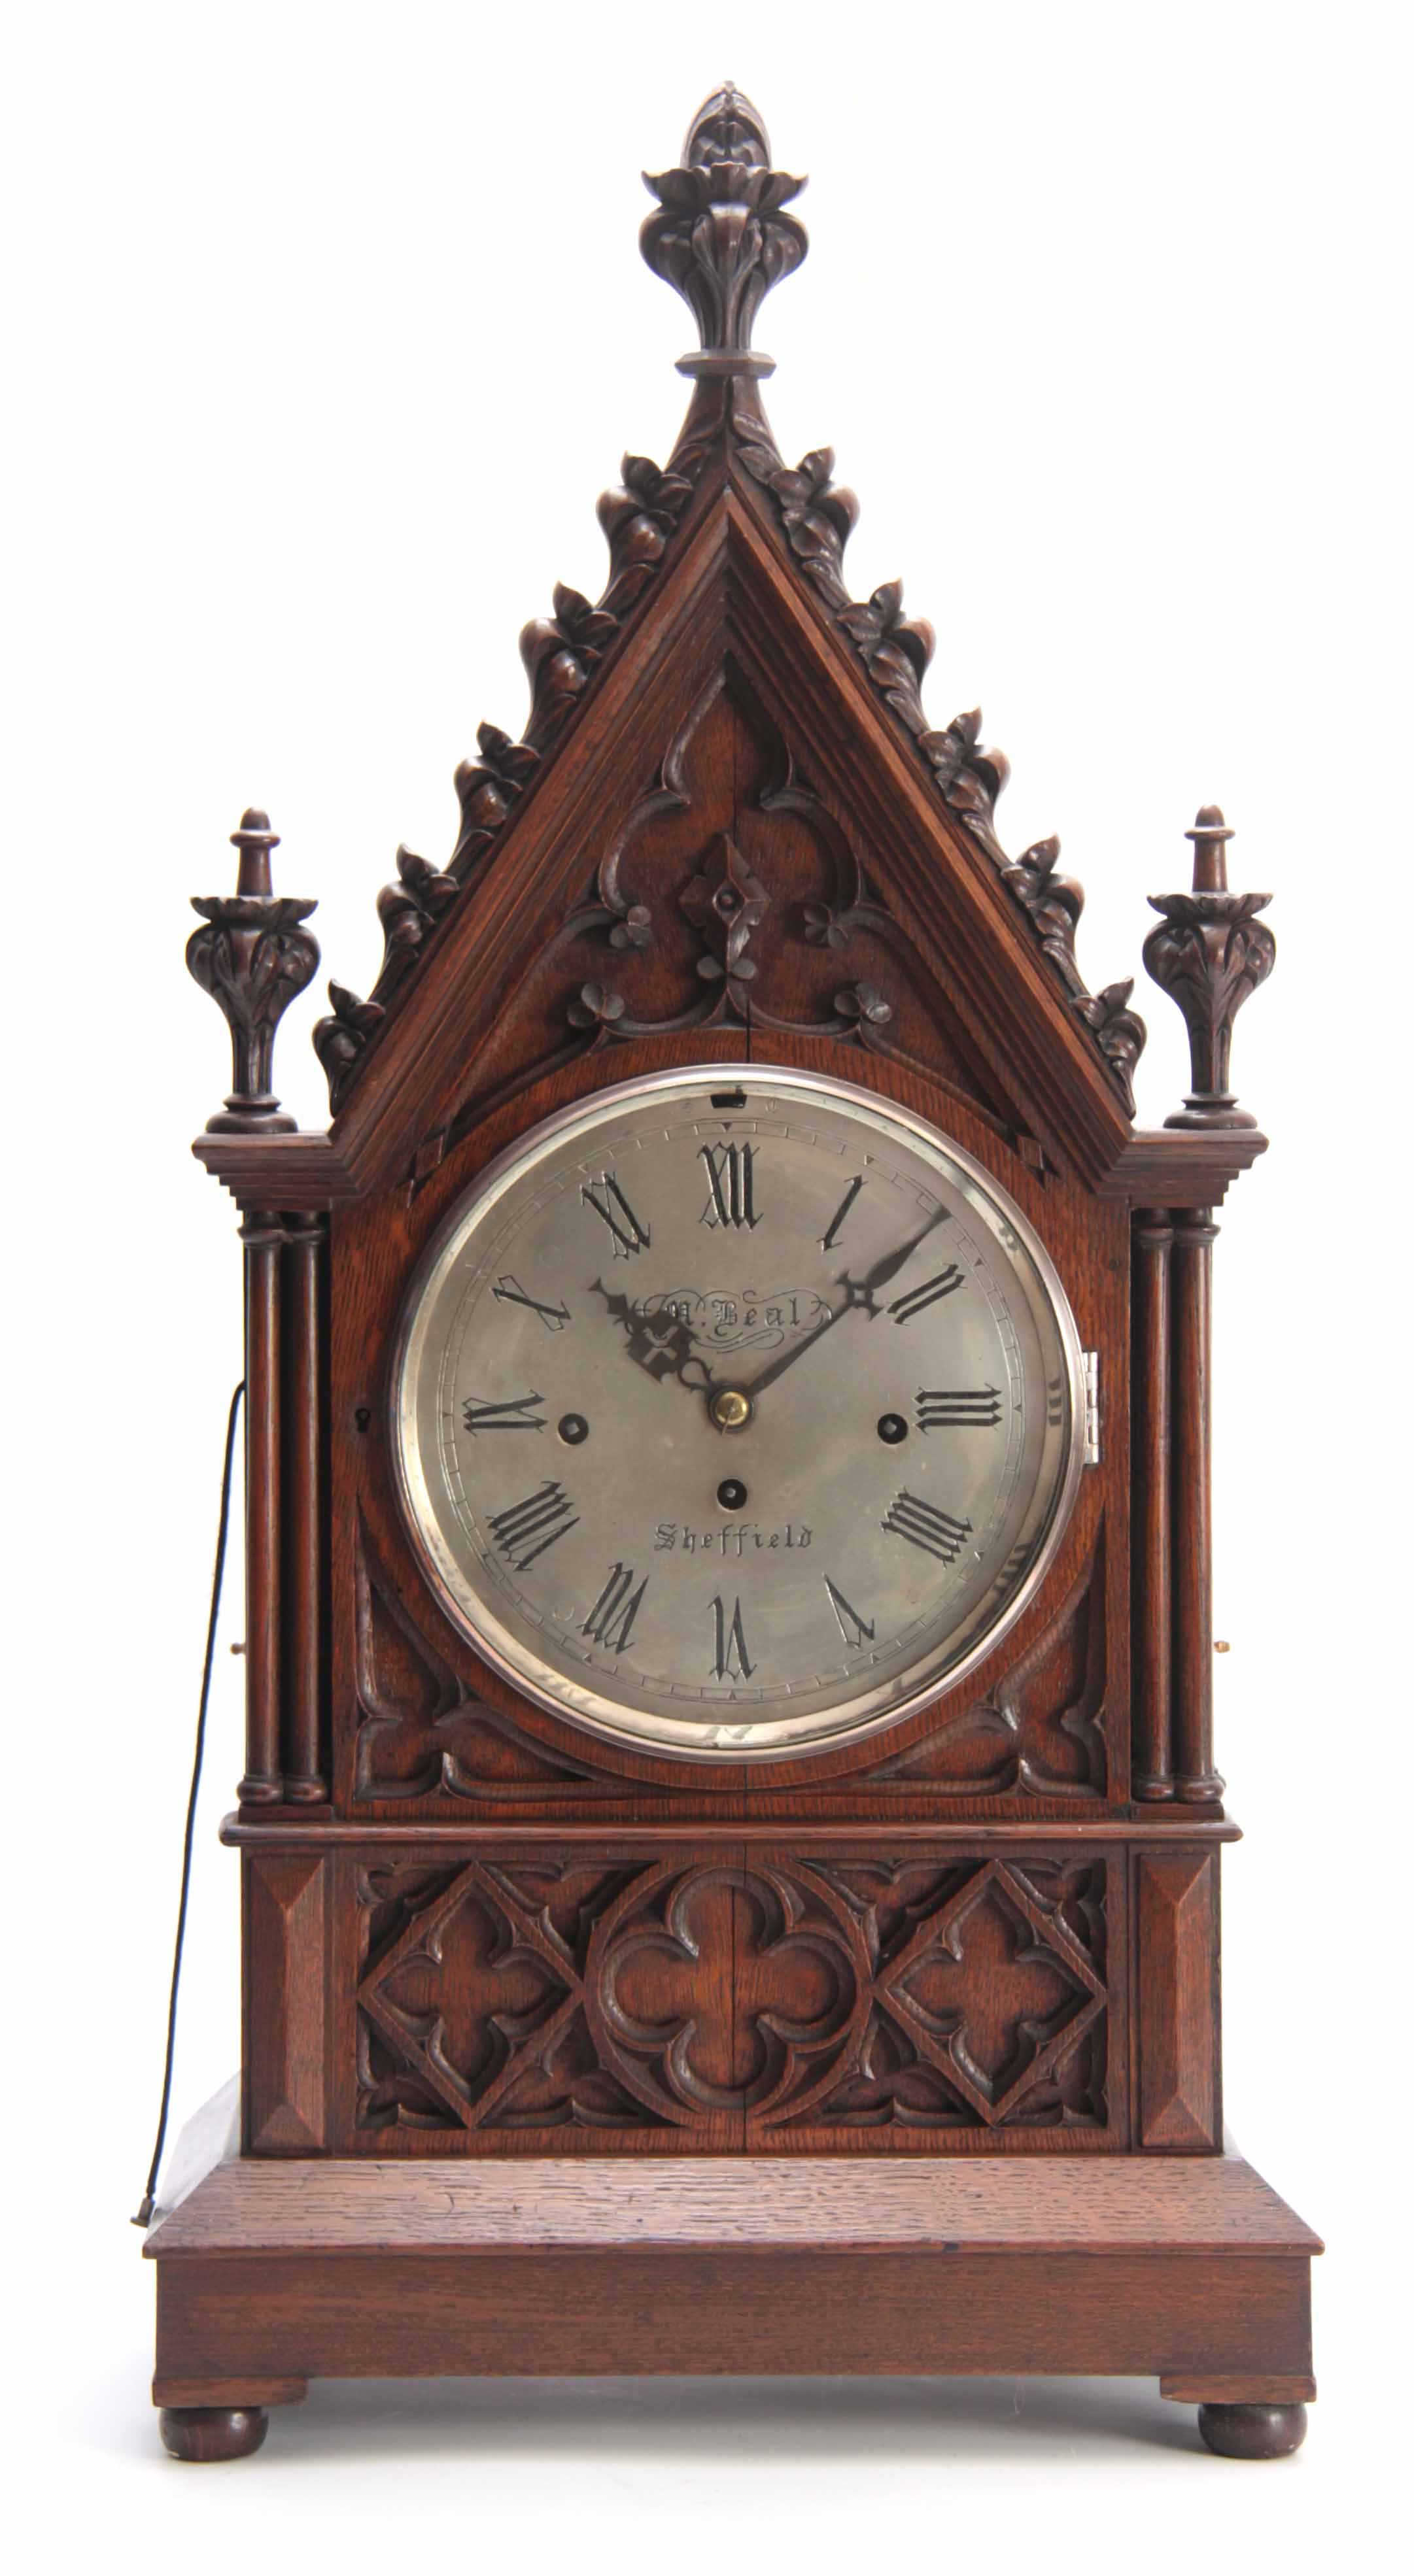 M. BEAL, SHEFFIELD A GOTHIC OAK CASED TRIPLE FUSEE BRACKET CLOCK the case with gothic carved